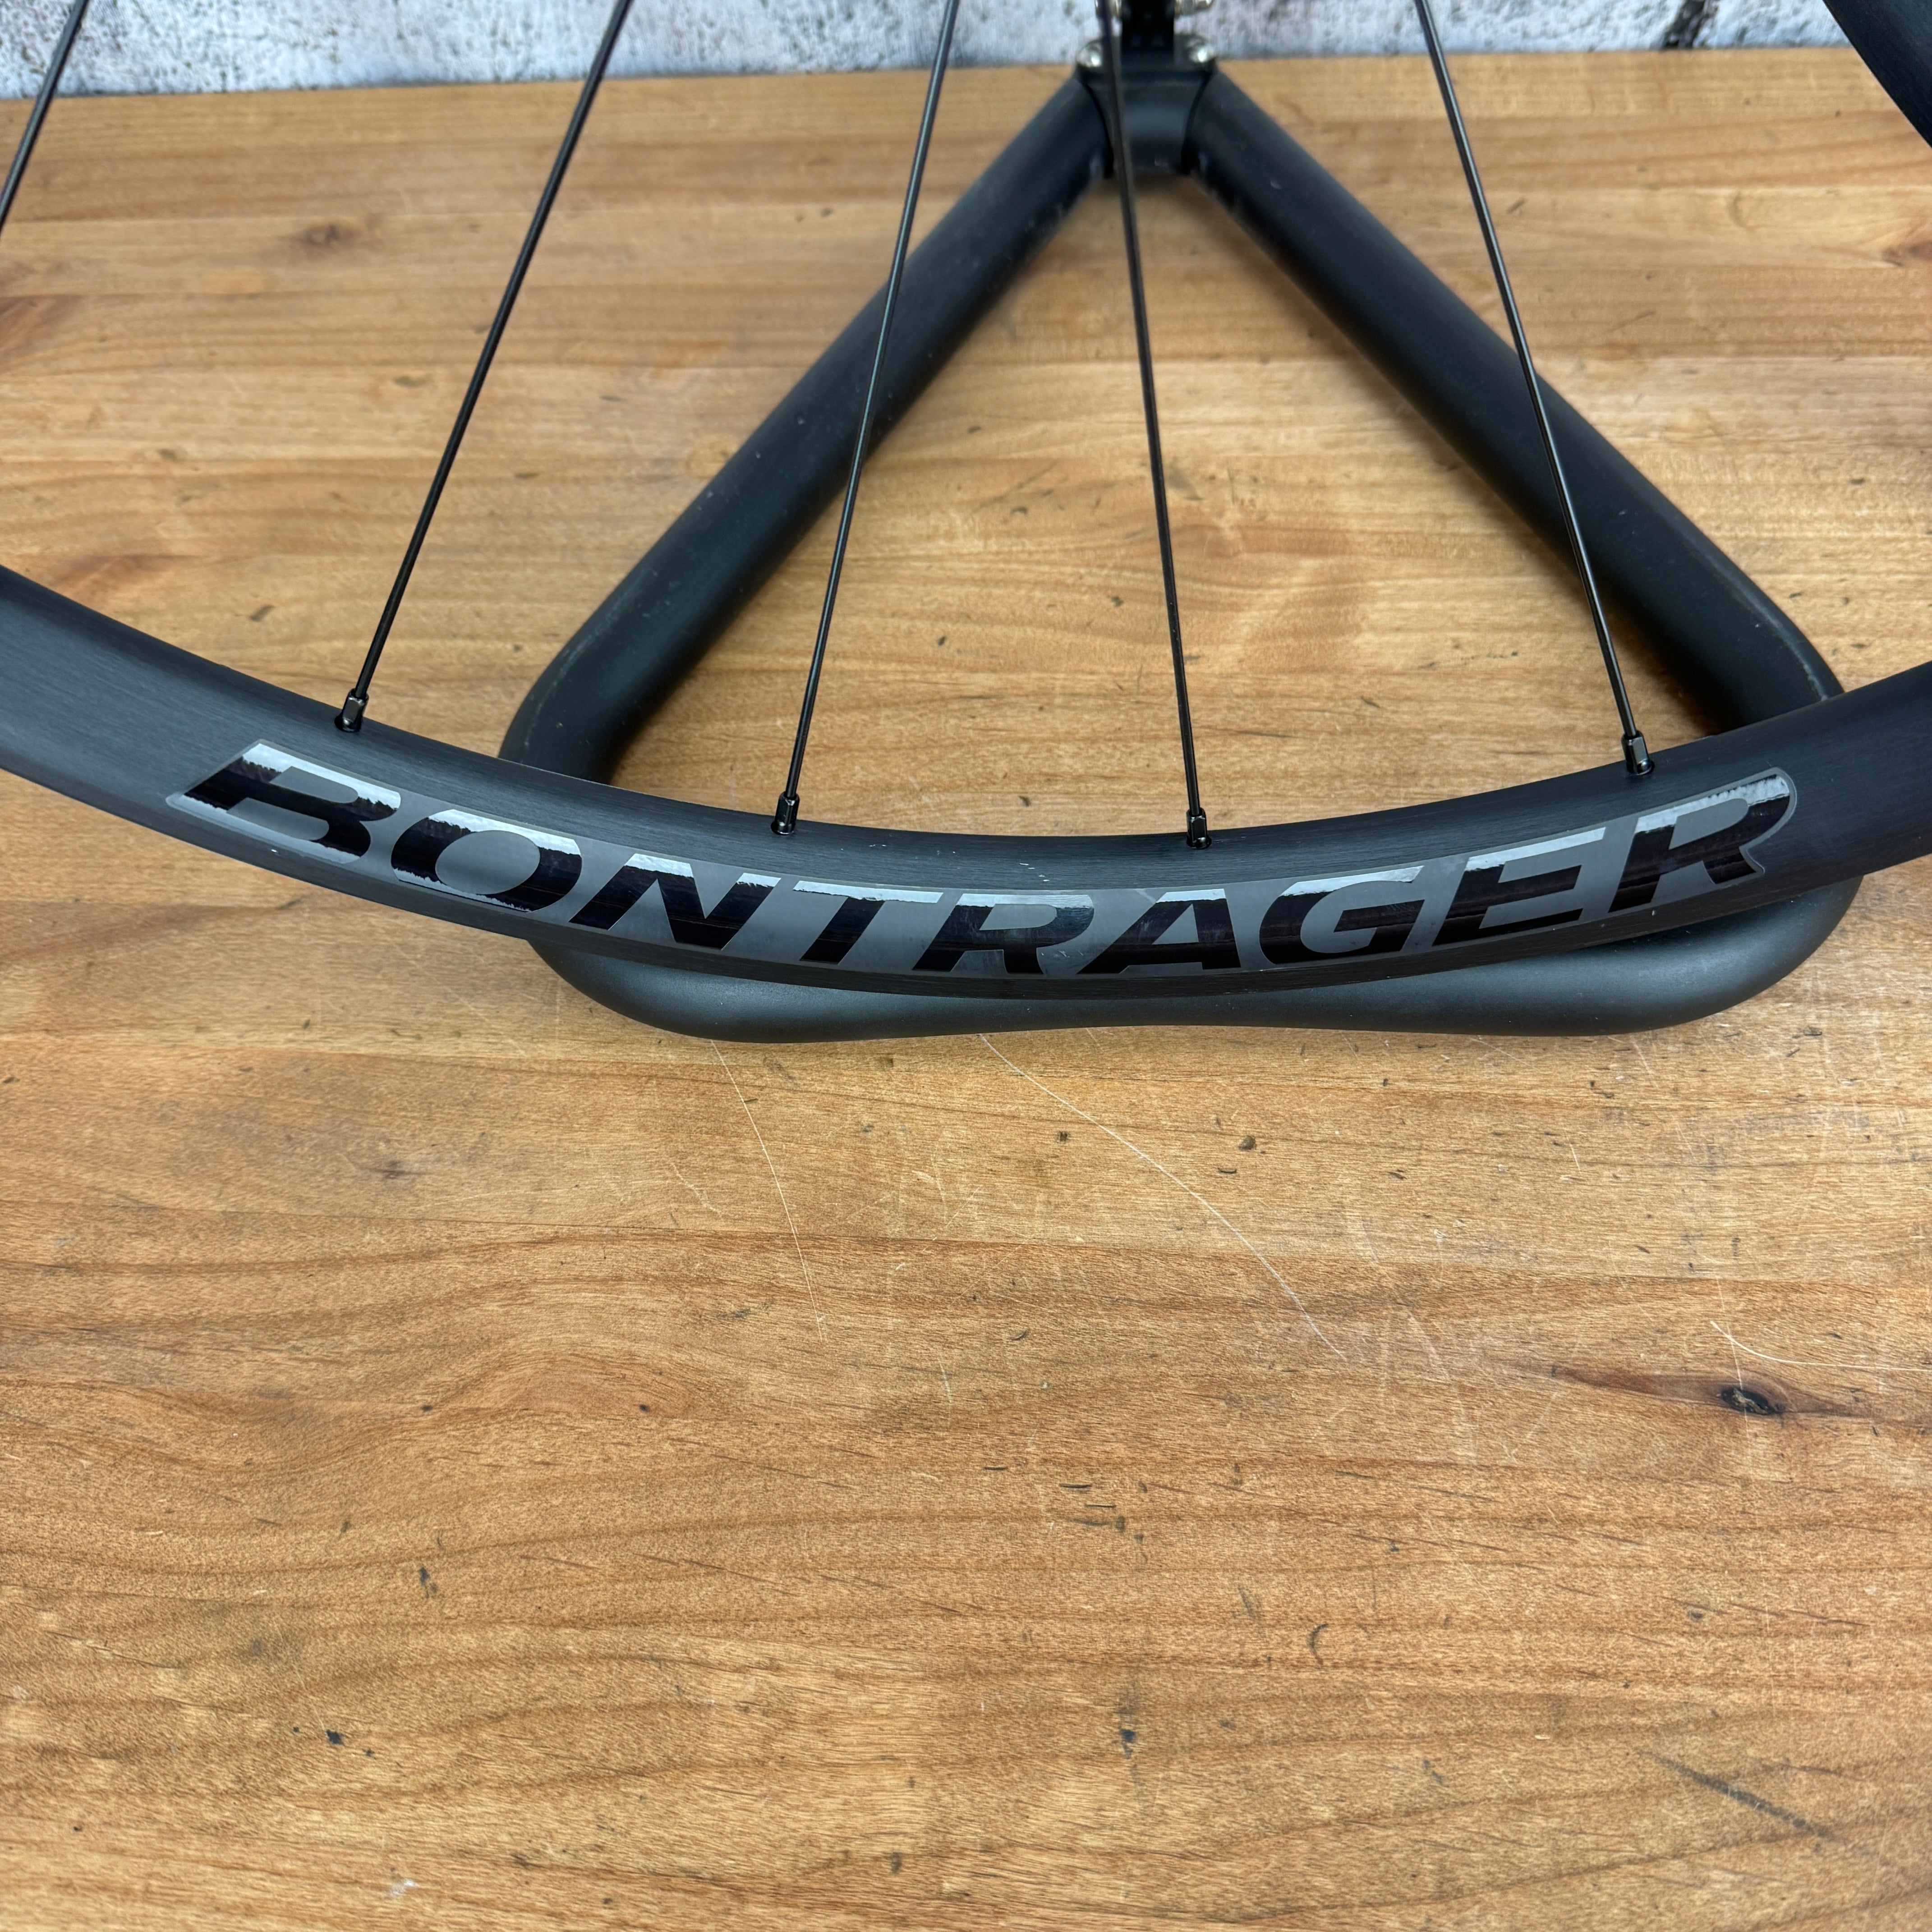 New Takeoff! Bontrager Paradigm Comp 25 TLR Alloy Tubeless Disc